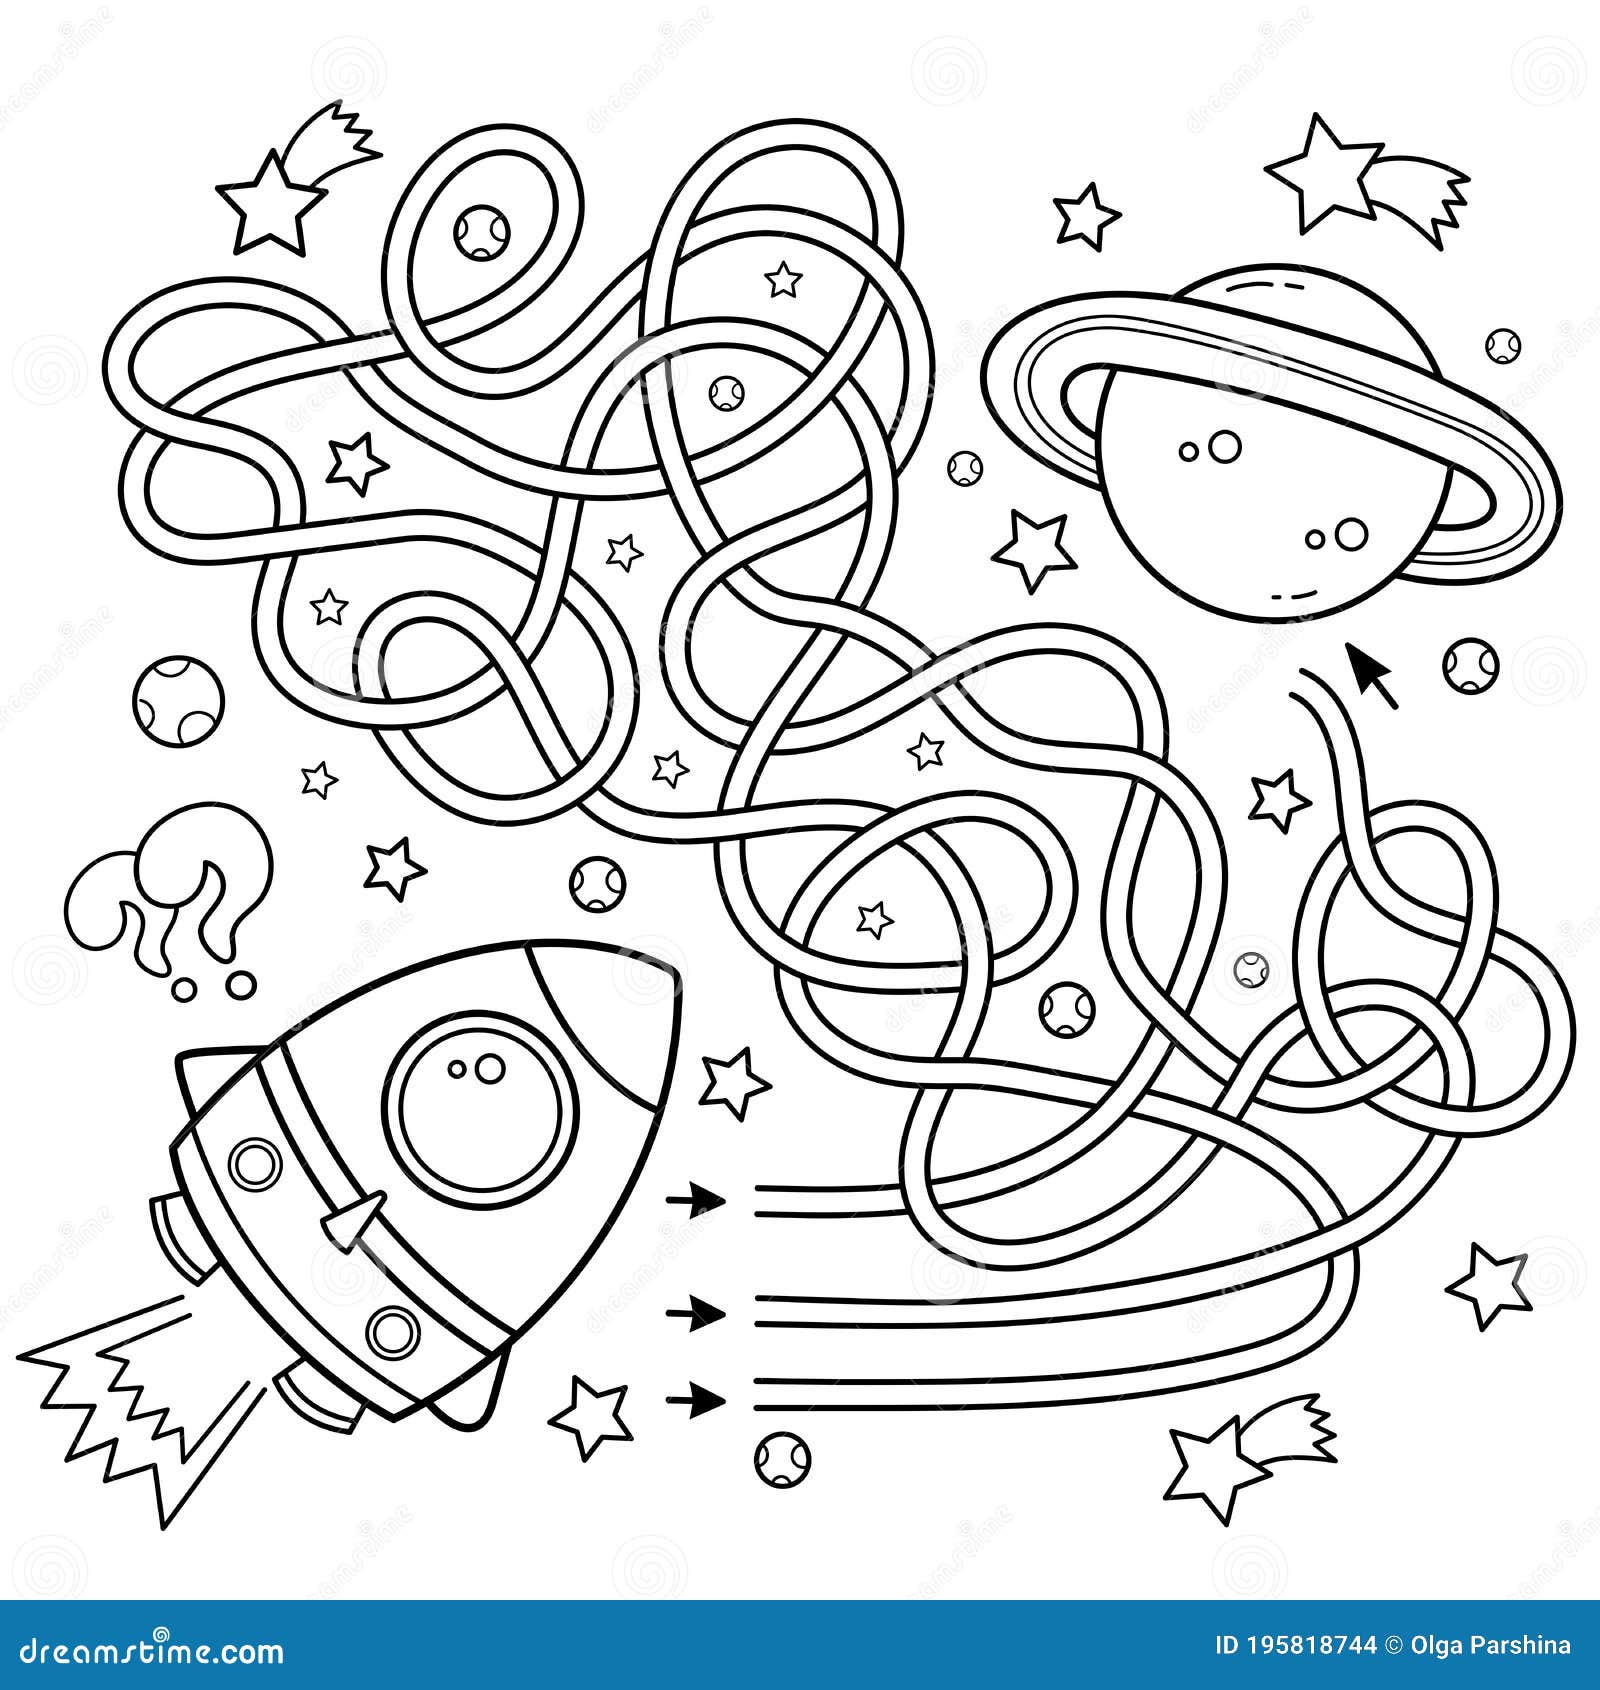 Maze or labyrinth game puzzle tangled road coloring page outline of cartoon rocket in space coloring book for kids stock vector